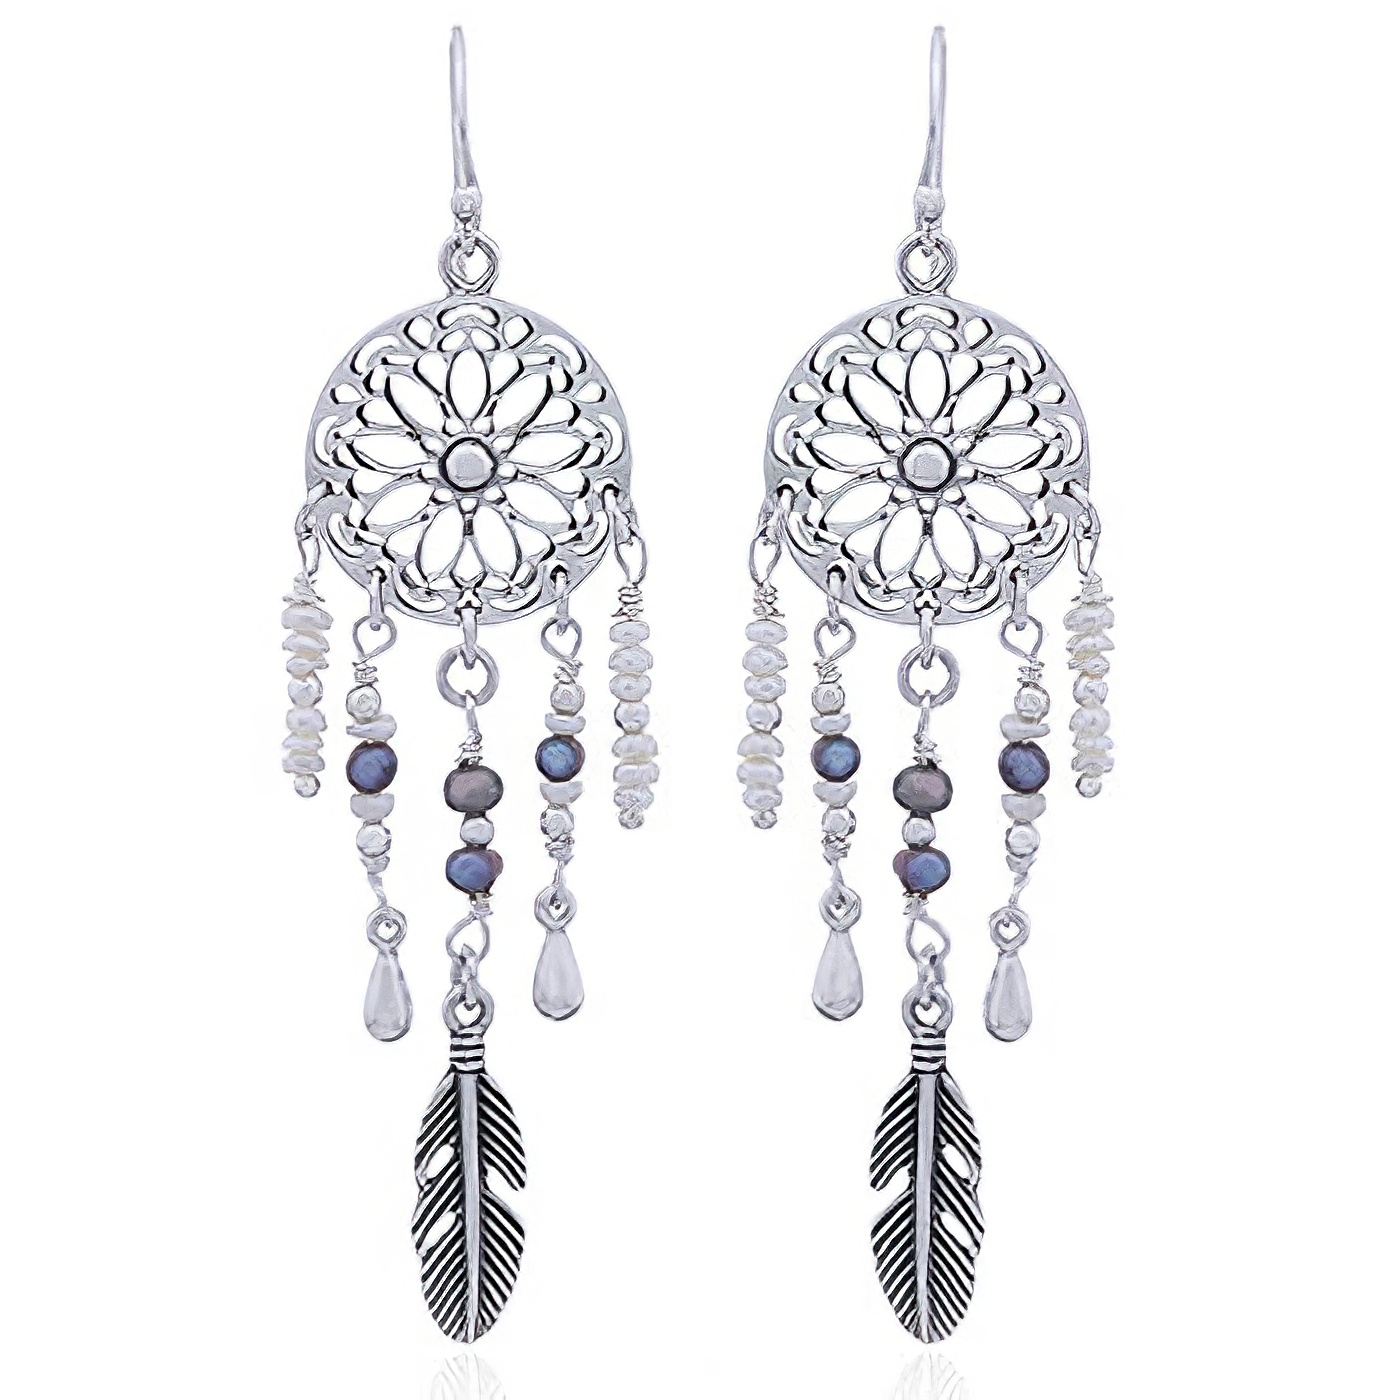 Silver and Pearls Dream Catcher Earrings by BeYindi 